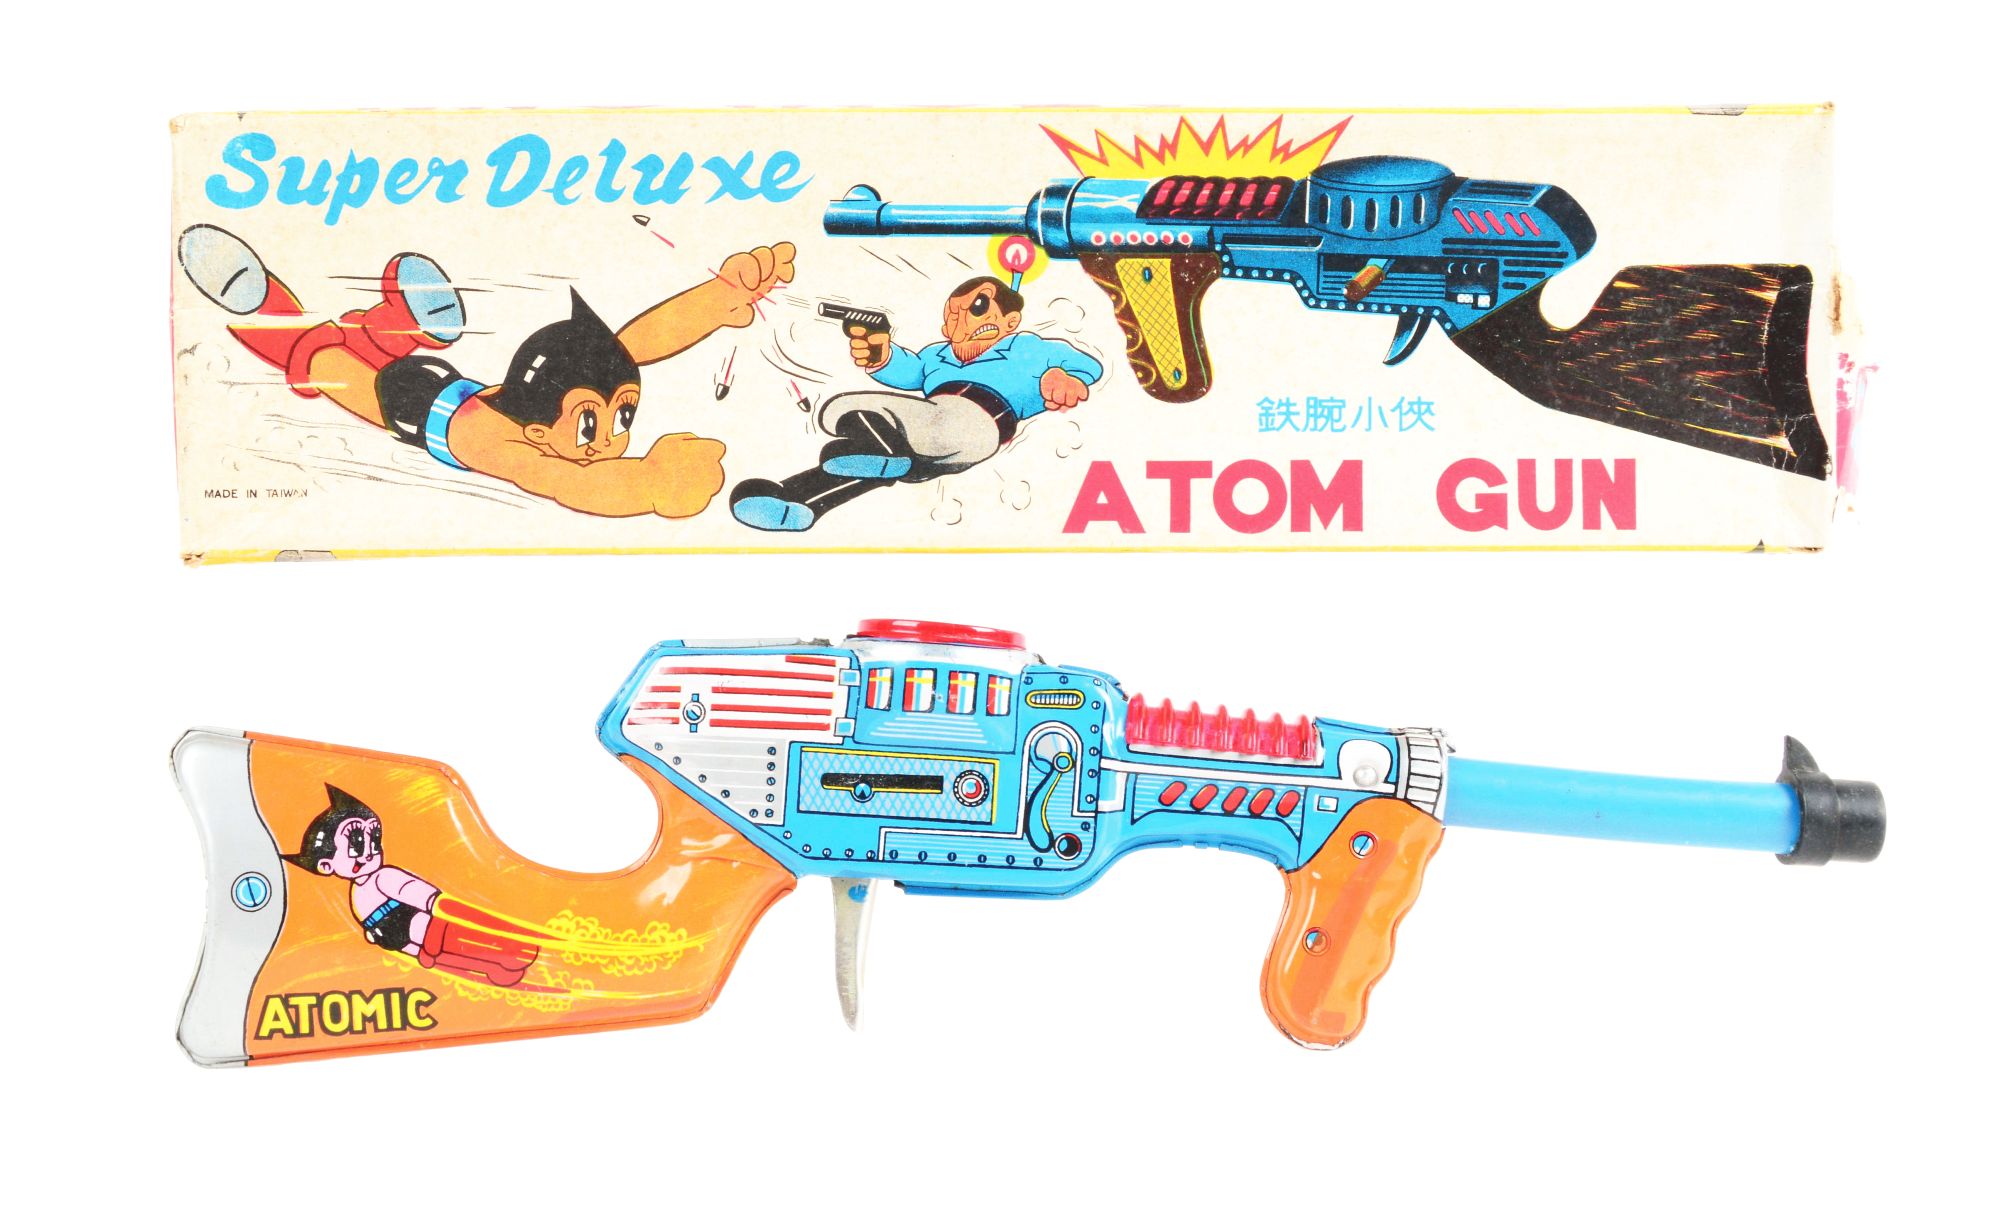 Super Deluxe Atom Gun with graphics of flying Atom Boy on both sides of toy and its accompanying original box. Made in Taiwan. Excellent condition. Estimate $1,000-$1,500